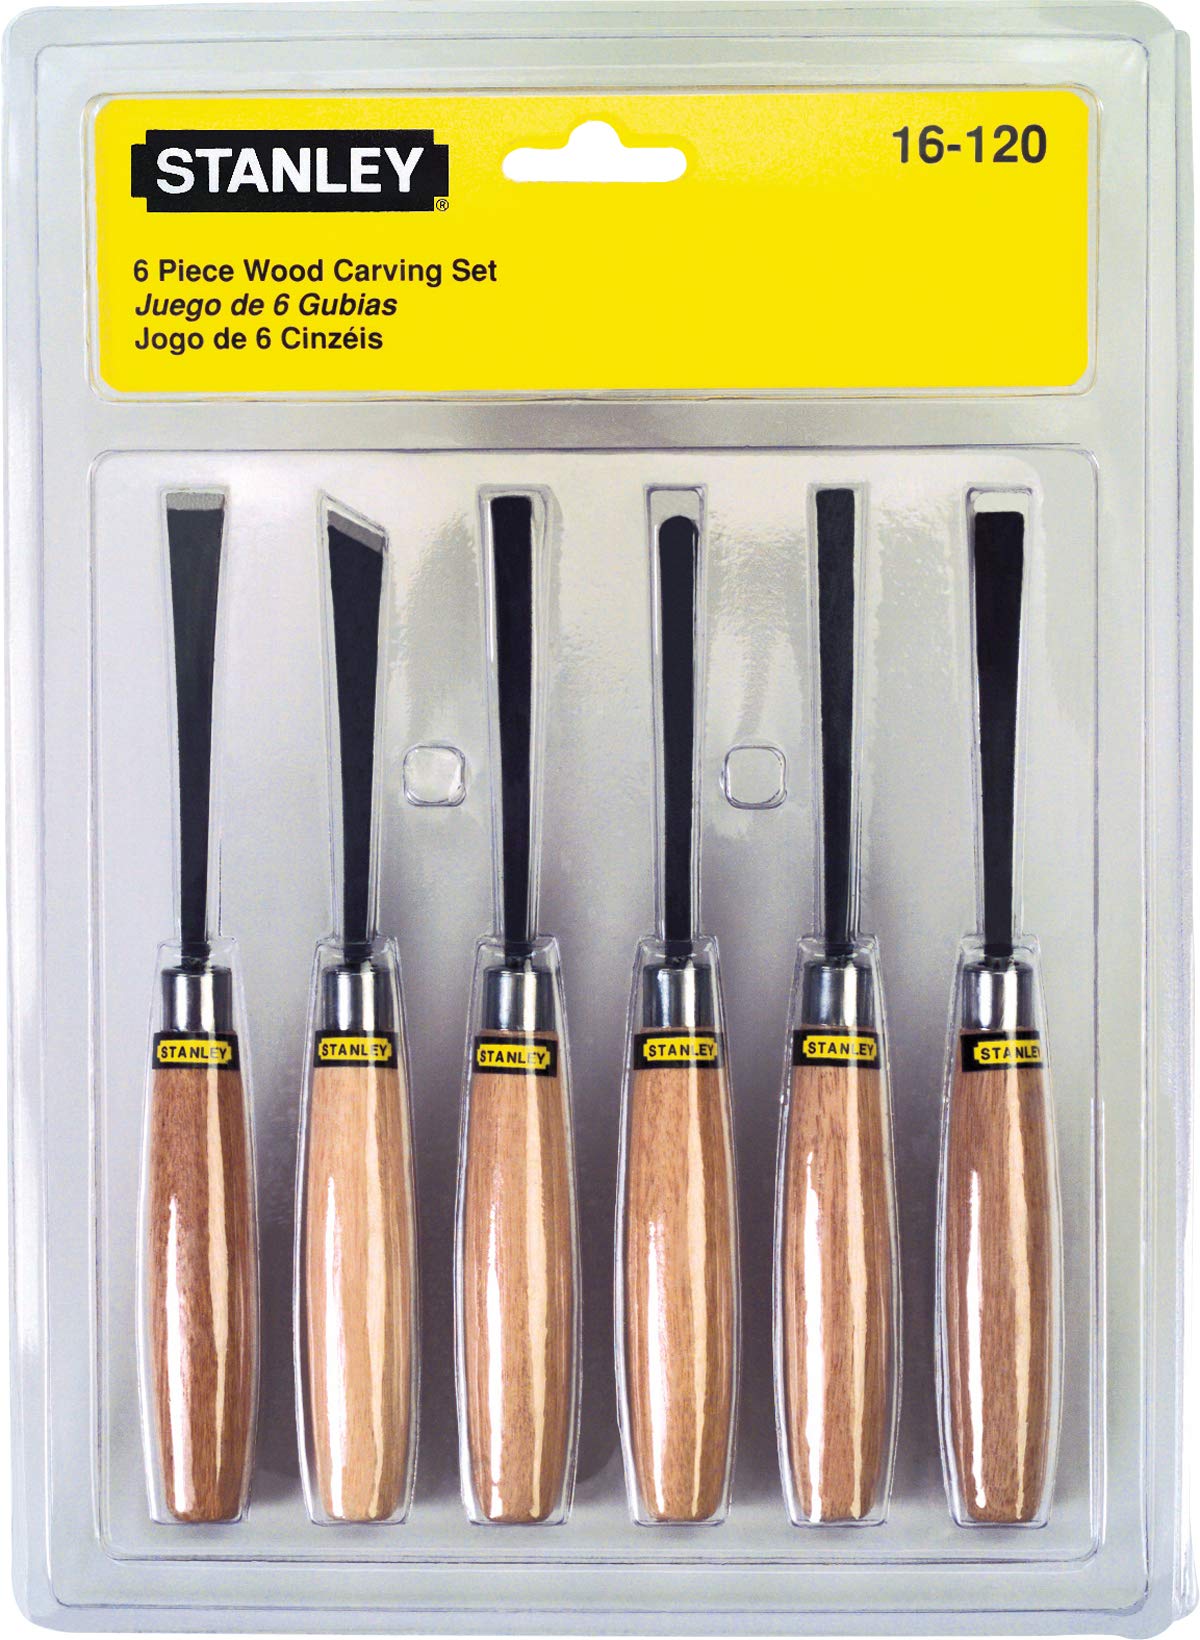 Stanley 16120 6-Piece Wood Carving Set (Brown) - Woodworking Chisel Set for Beginners and Professionals